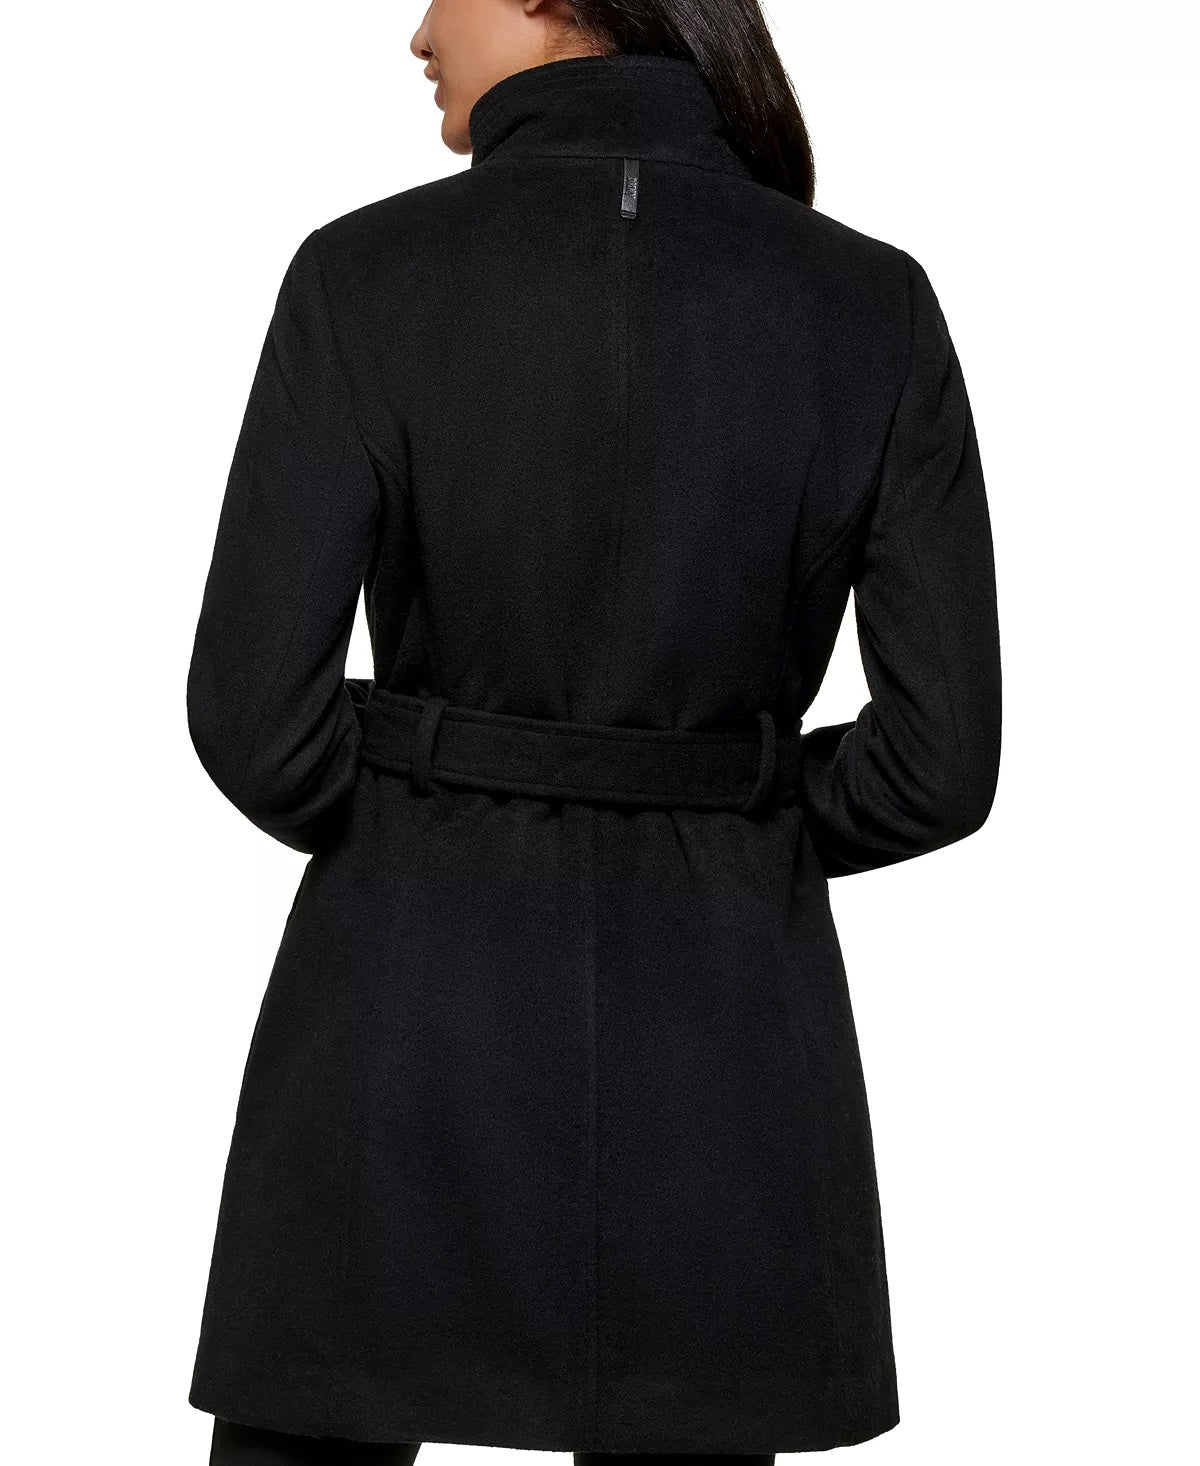 DKNY Women's Stand-Collar Button-Front Belted Coat Black Large